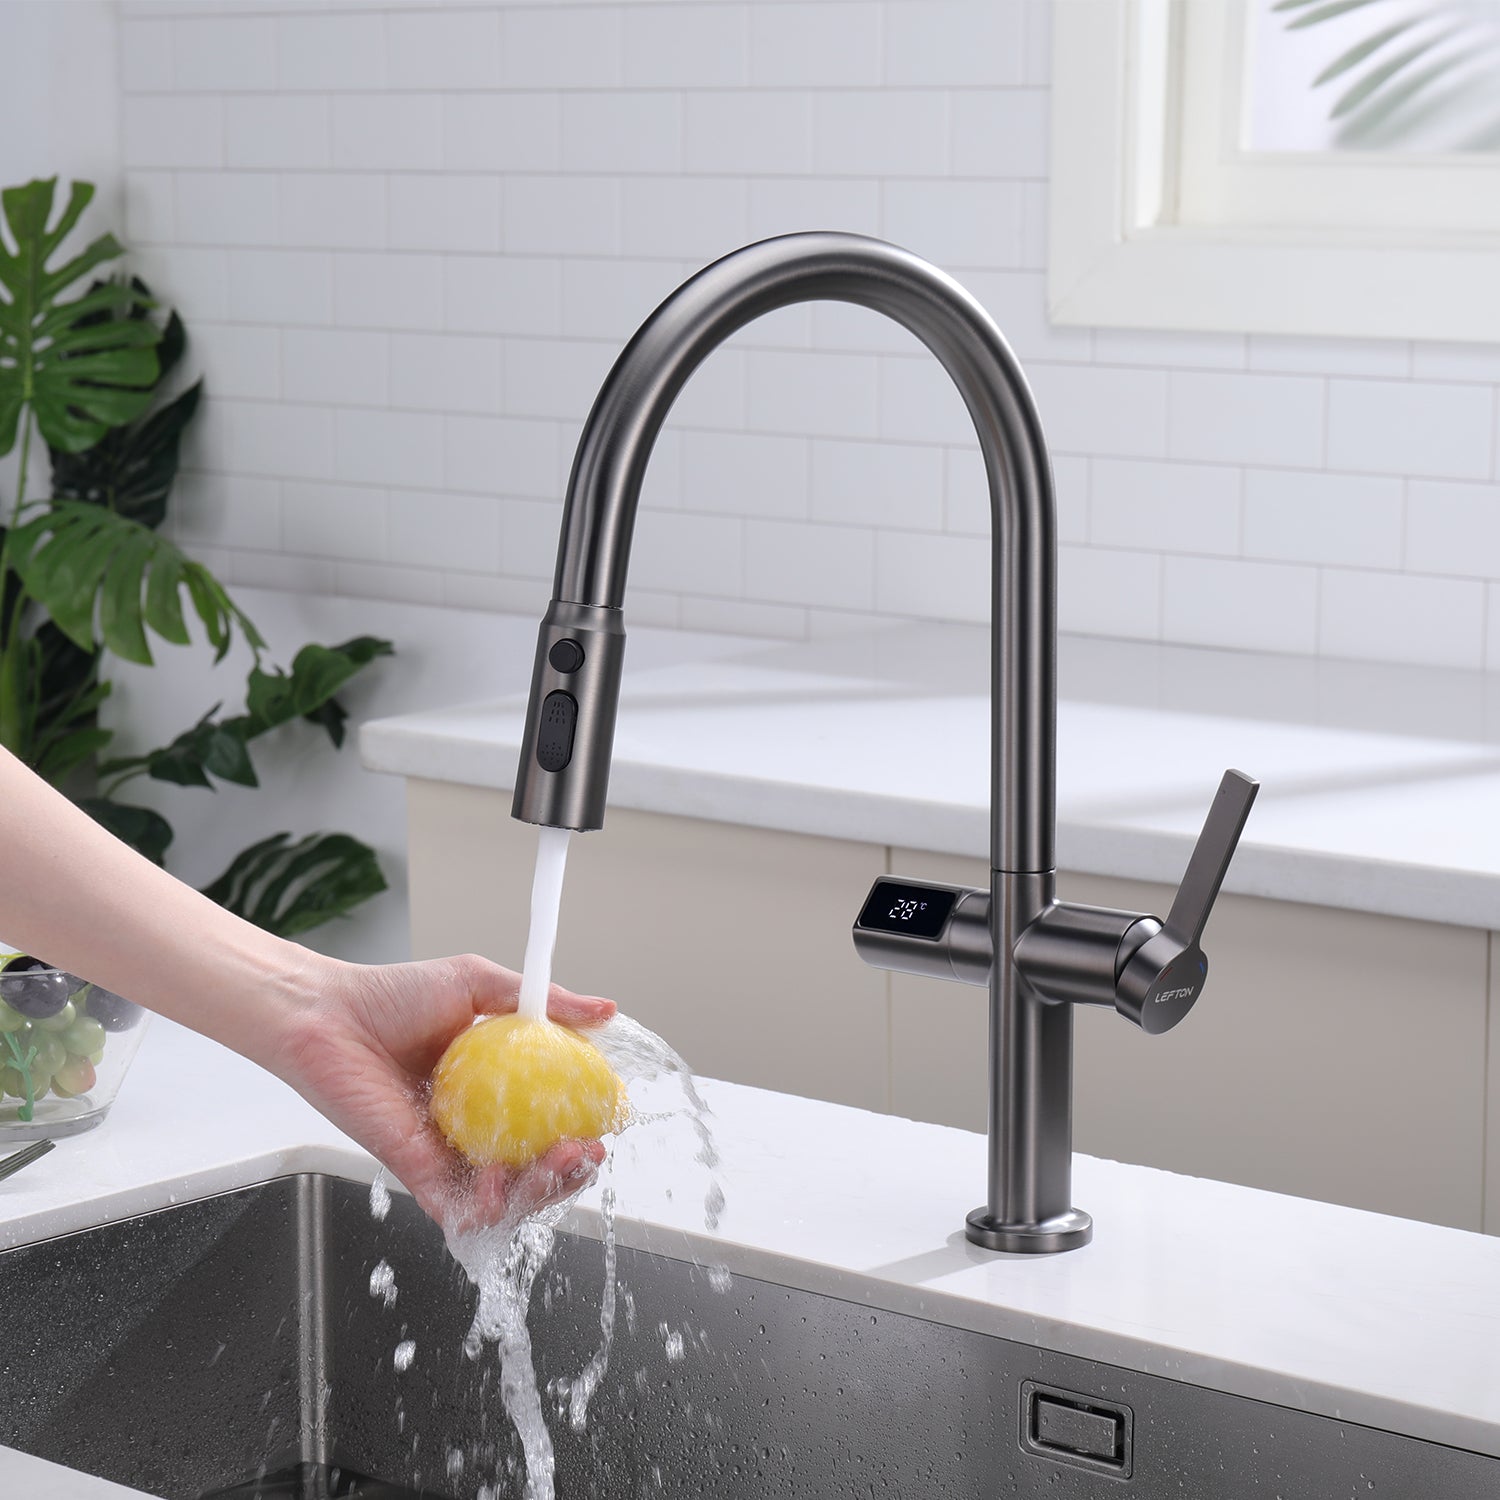 Lefton Automatic Sensor & Pull-Down Kitchen Faucet with Temperature Display-KF2206